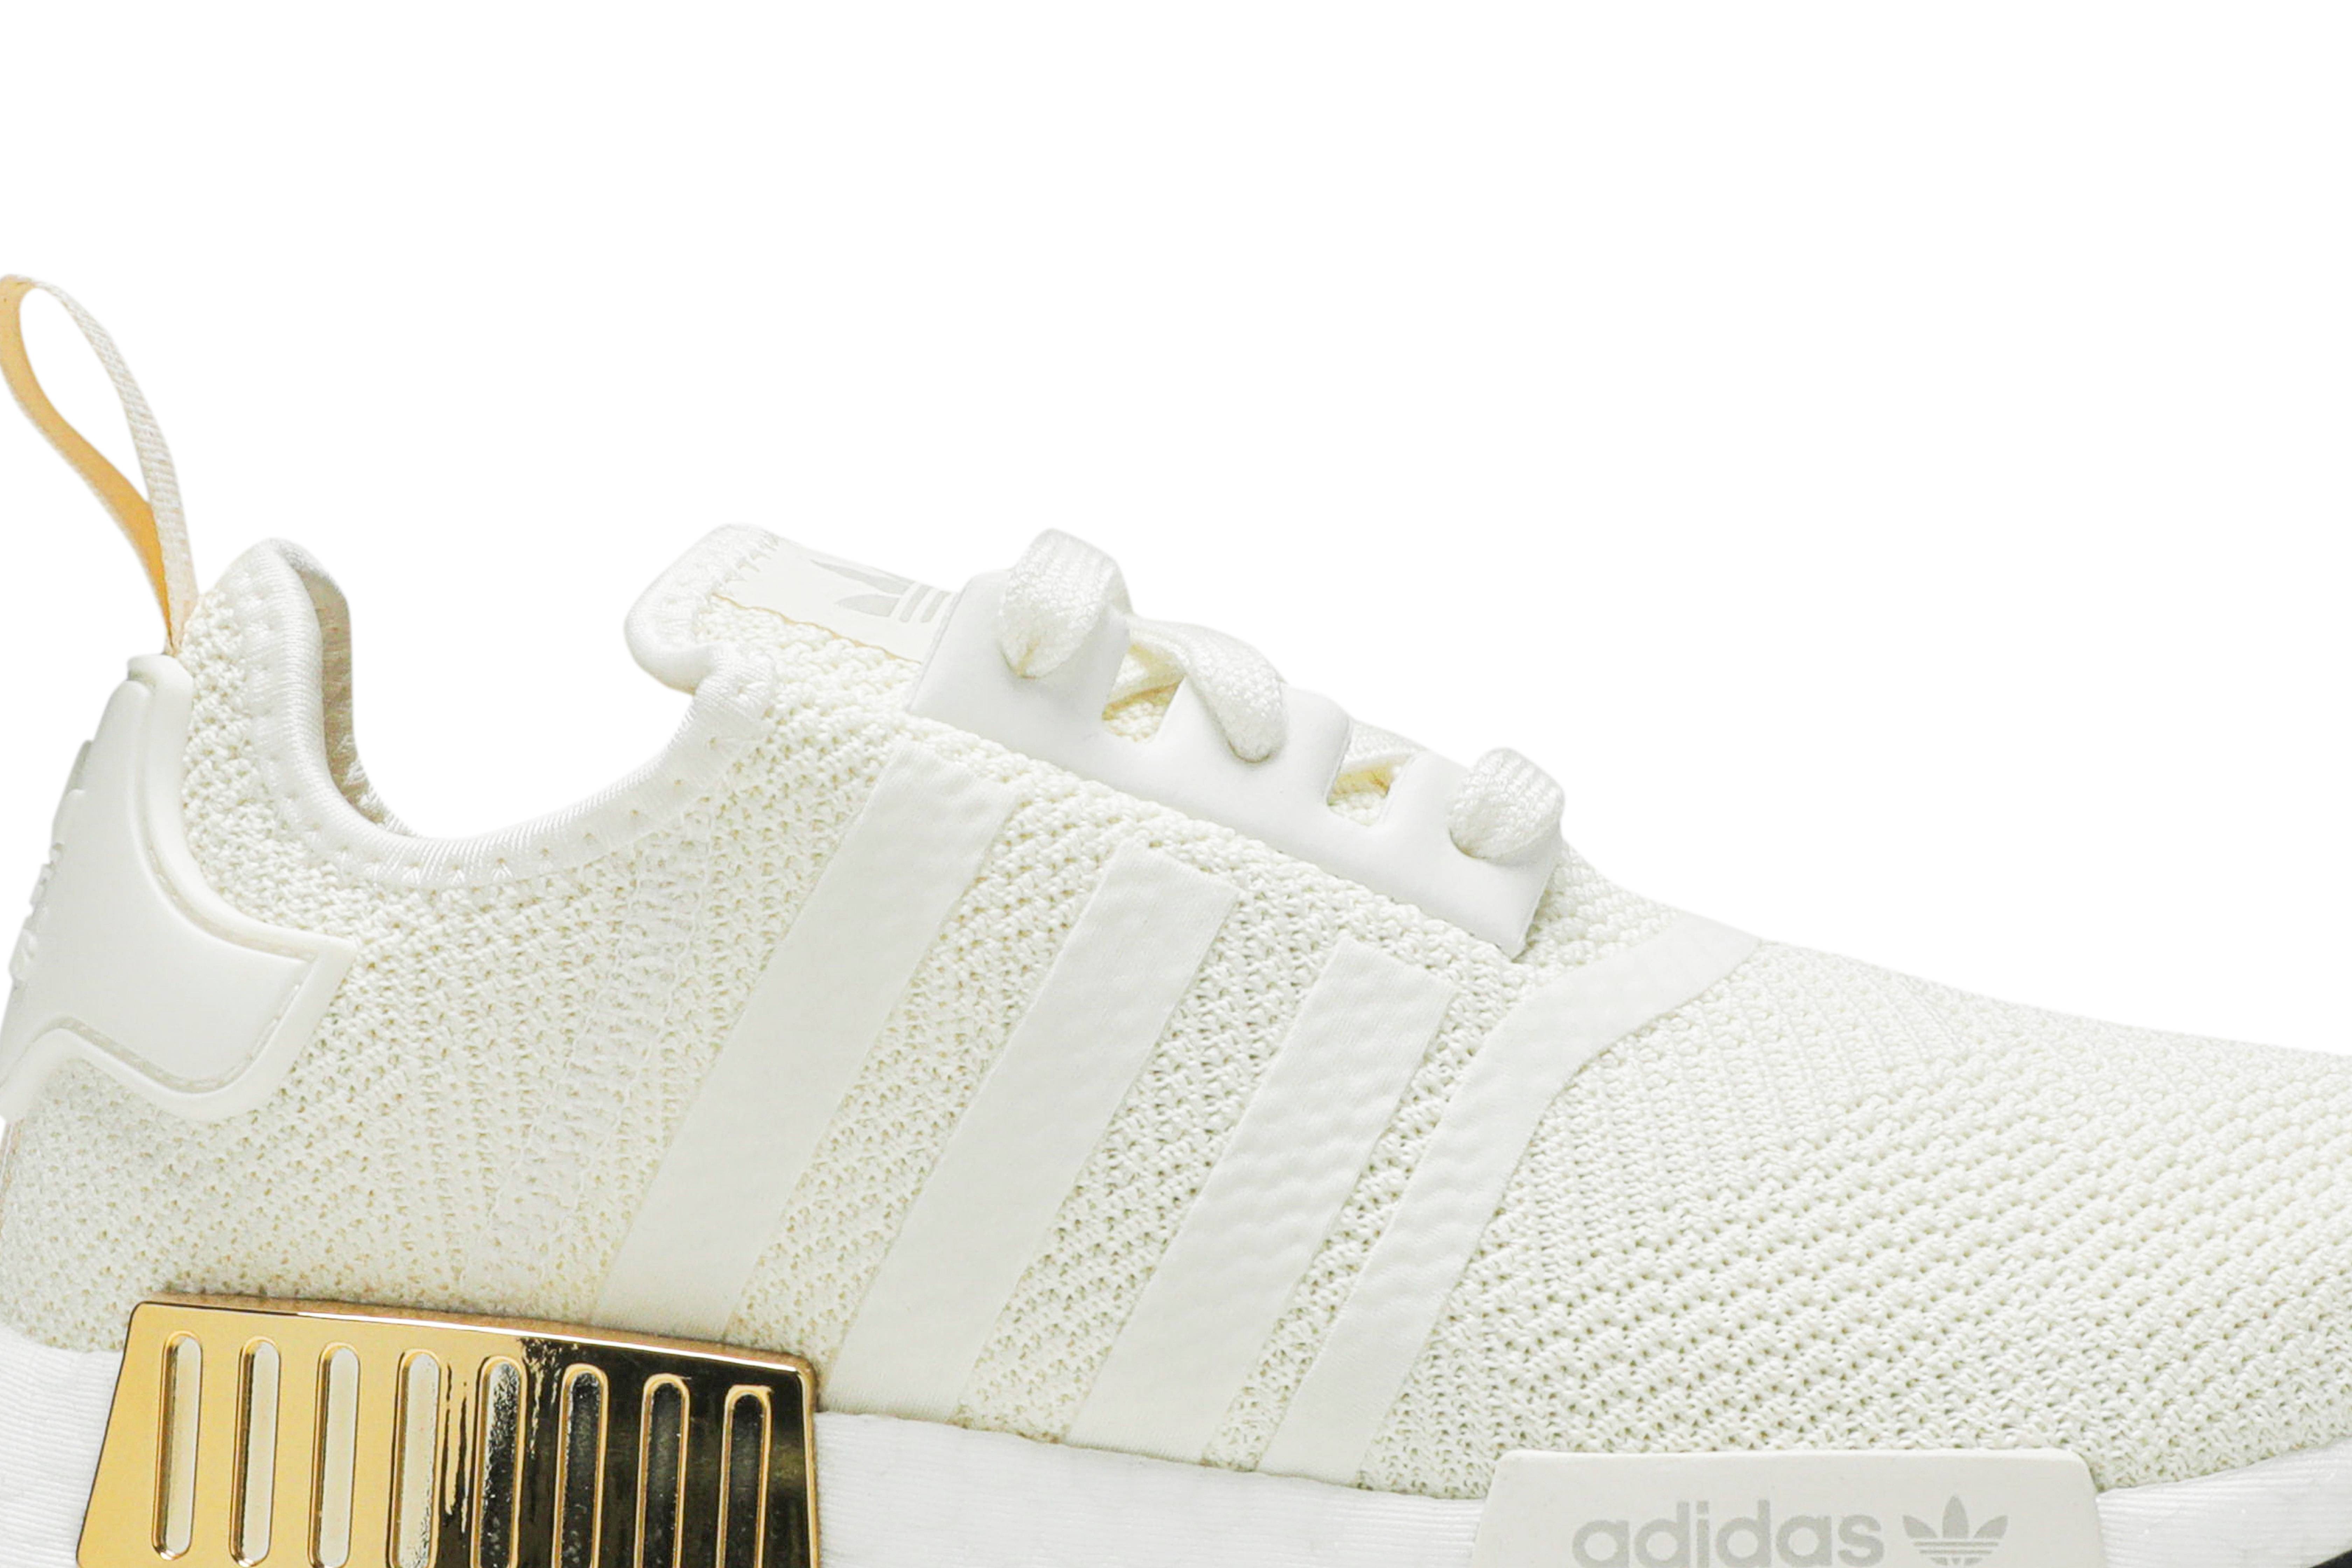 Wmns NMD_R1 'Off White Gold' - 2